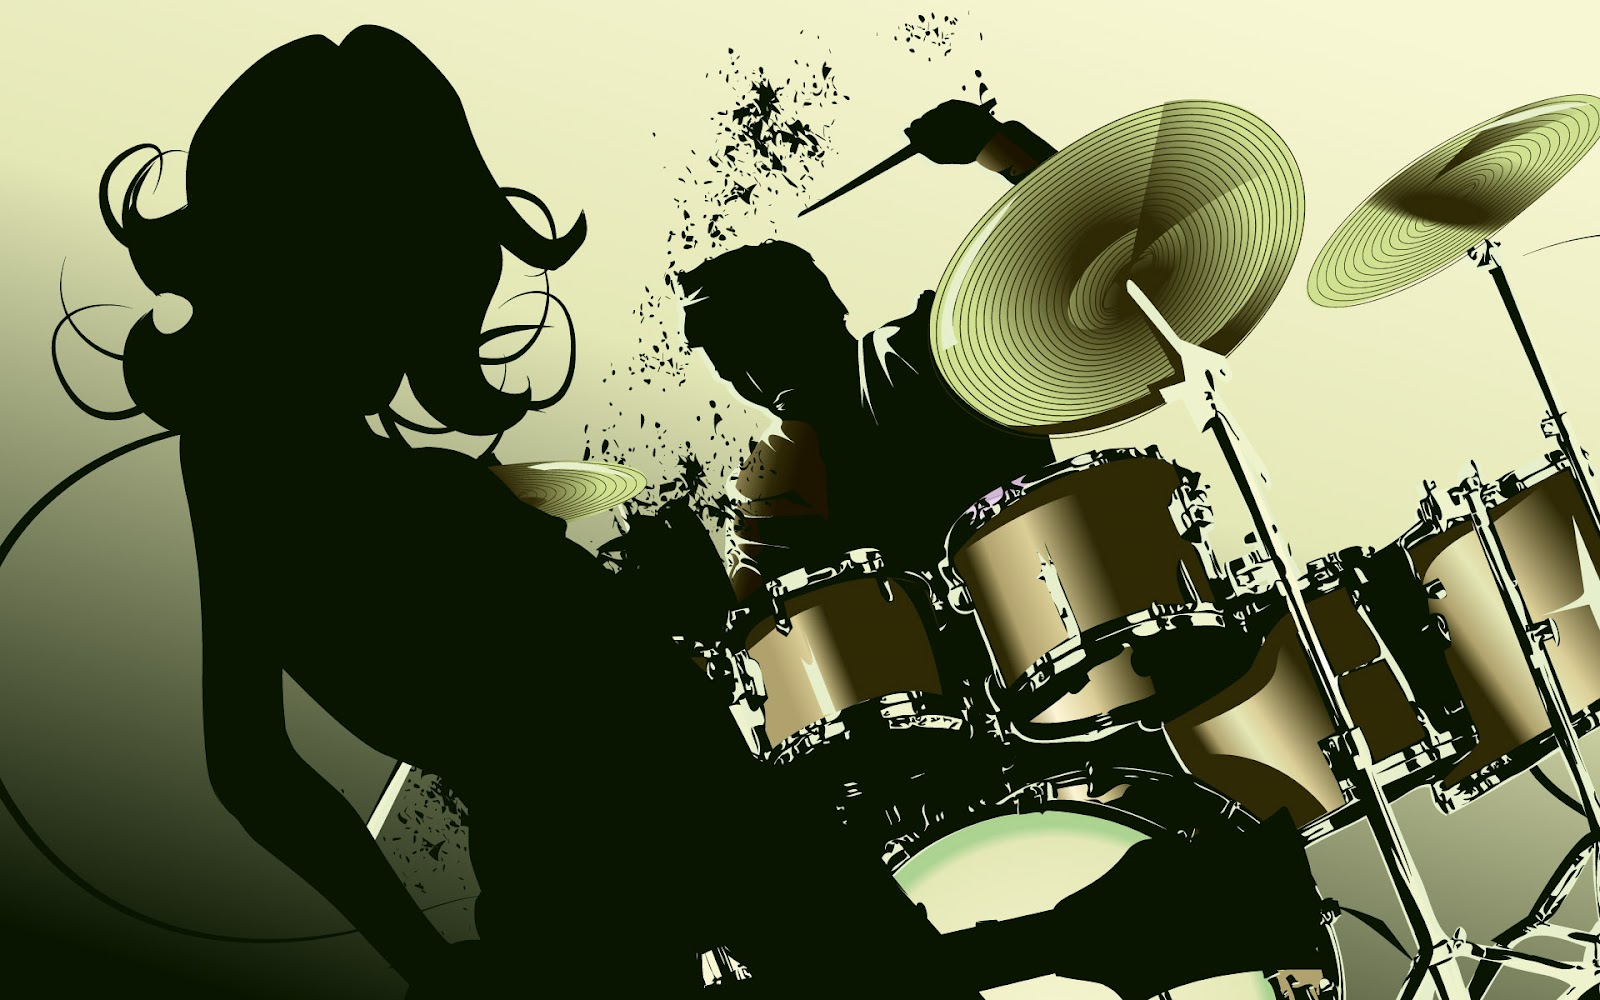 And Drummer Abstract Dubstep Wallpaper